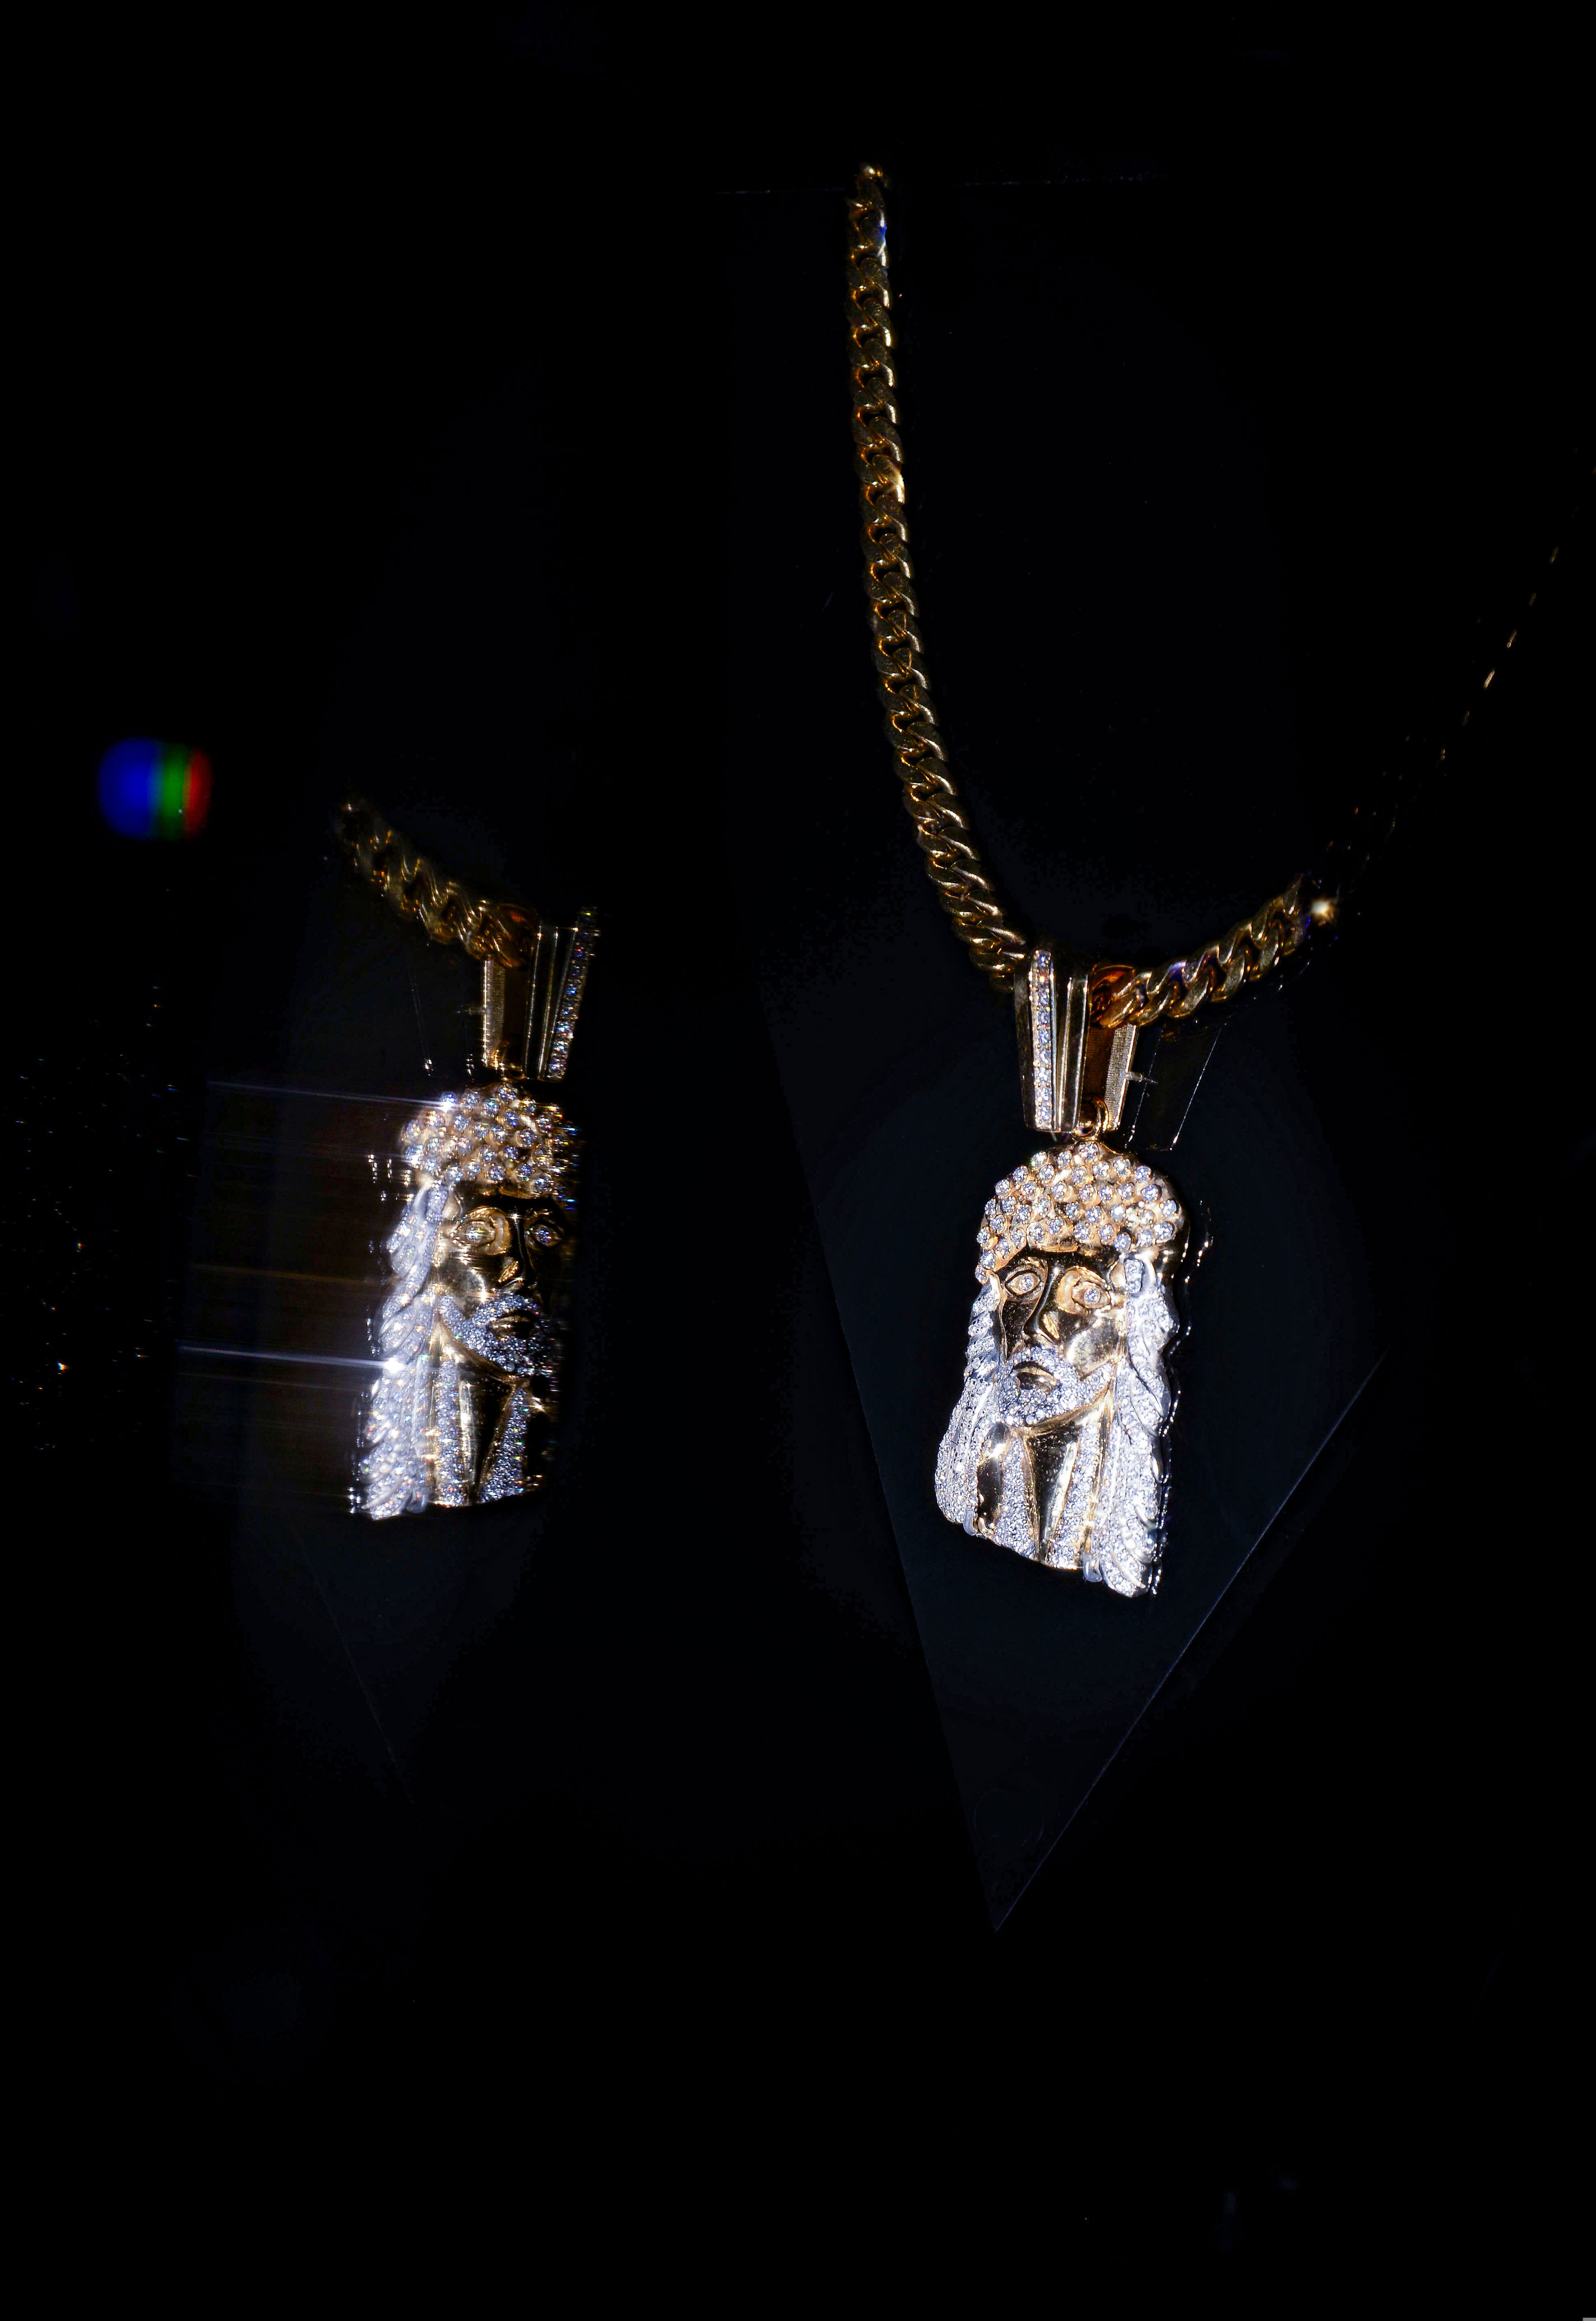 hip-hop bling is the thing at a luminous new jewelry exhibit